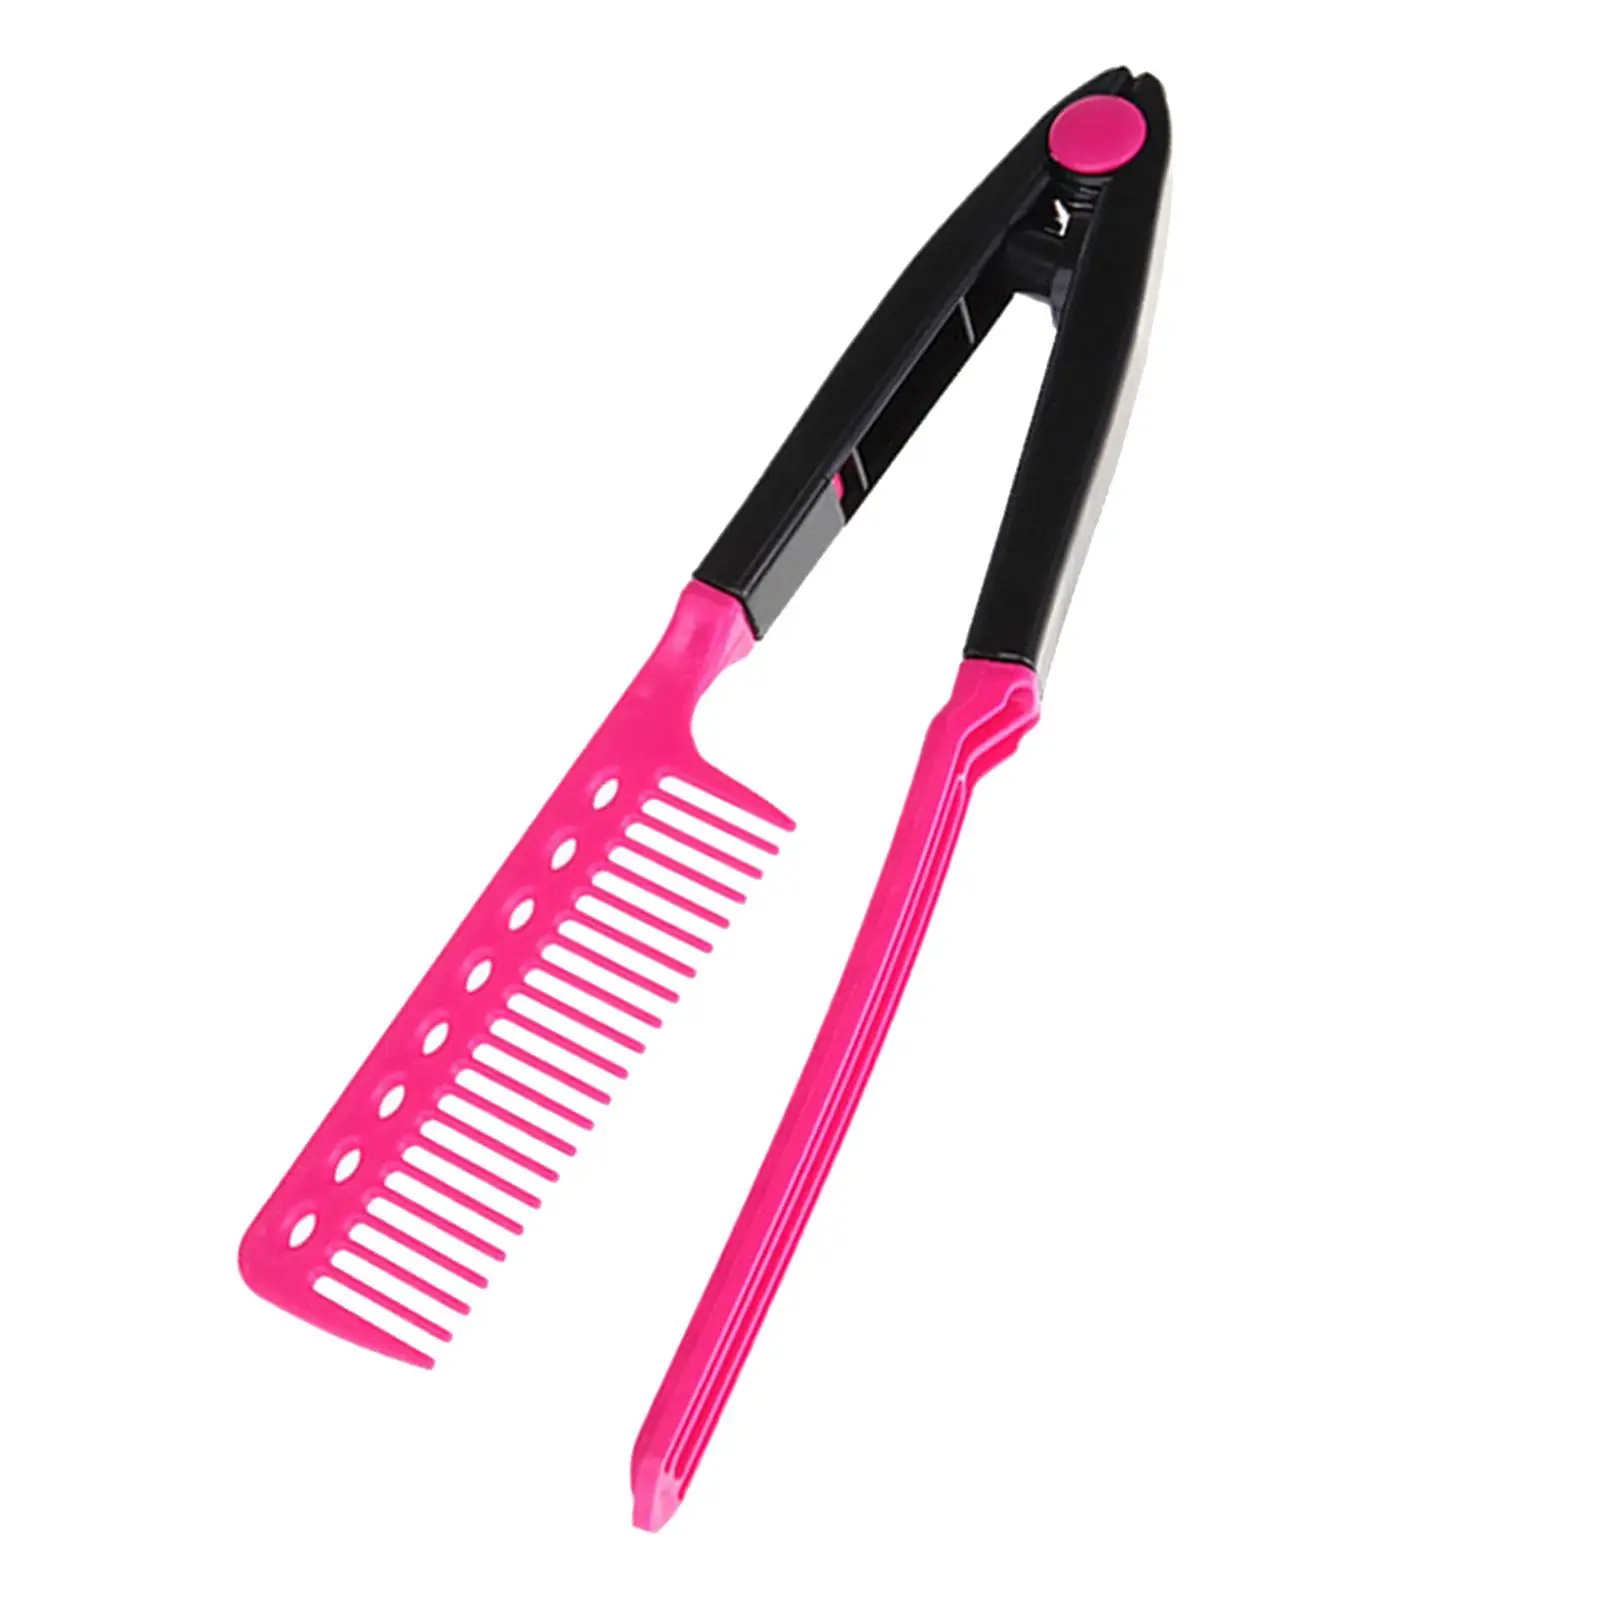 V Type Hair Straightener Comb Hairdressing Styling Tool Convenient Heat Resistance Home Salon Use Flat Iron Comb for Knotty Hair